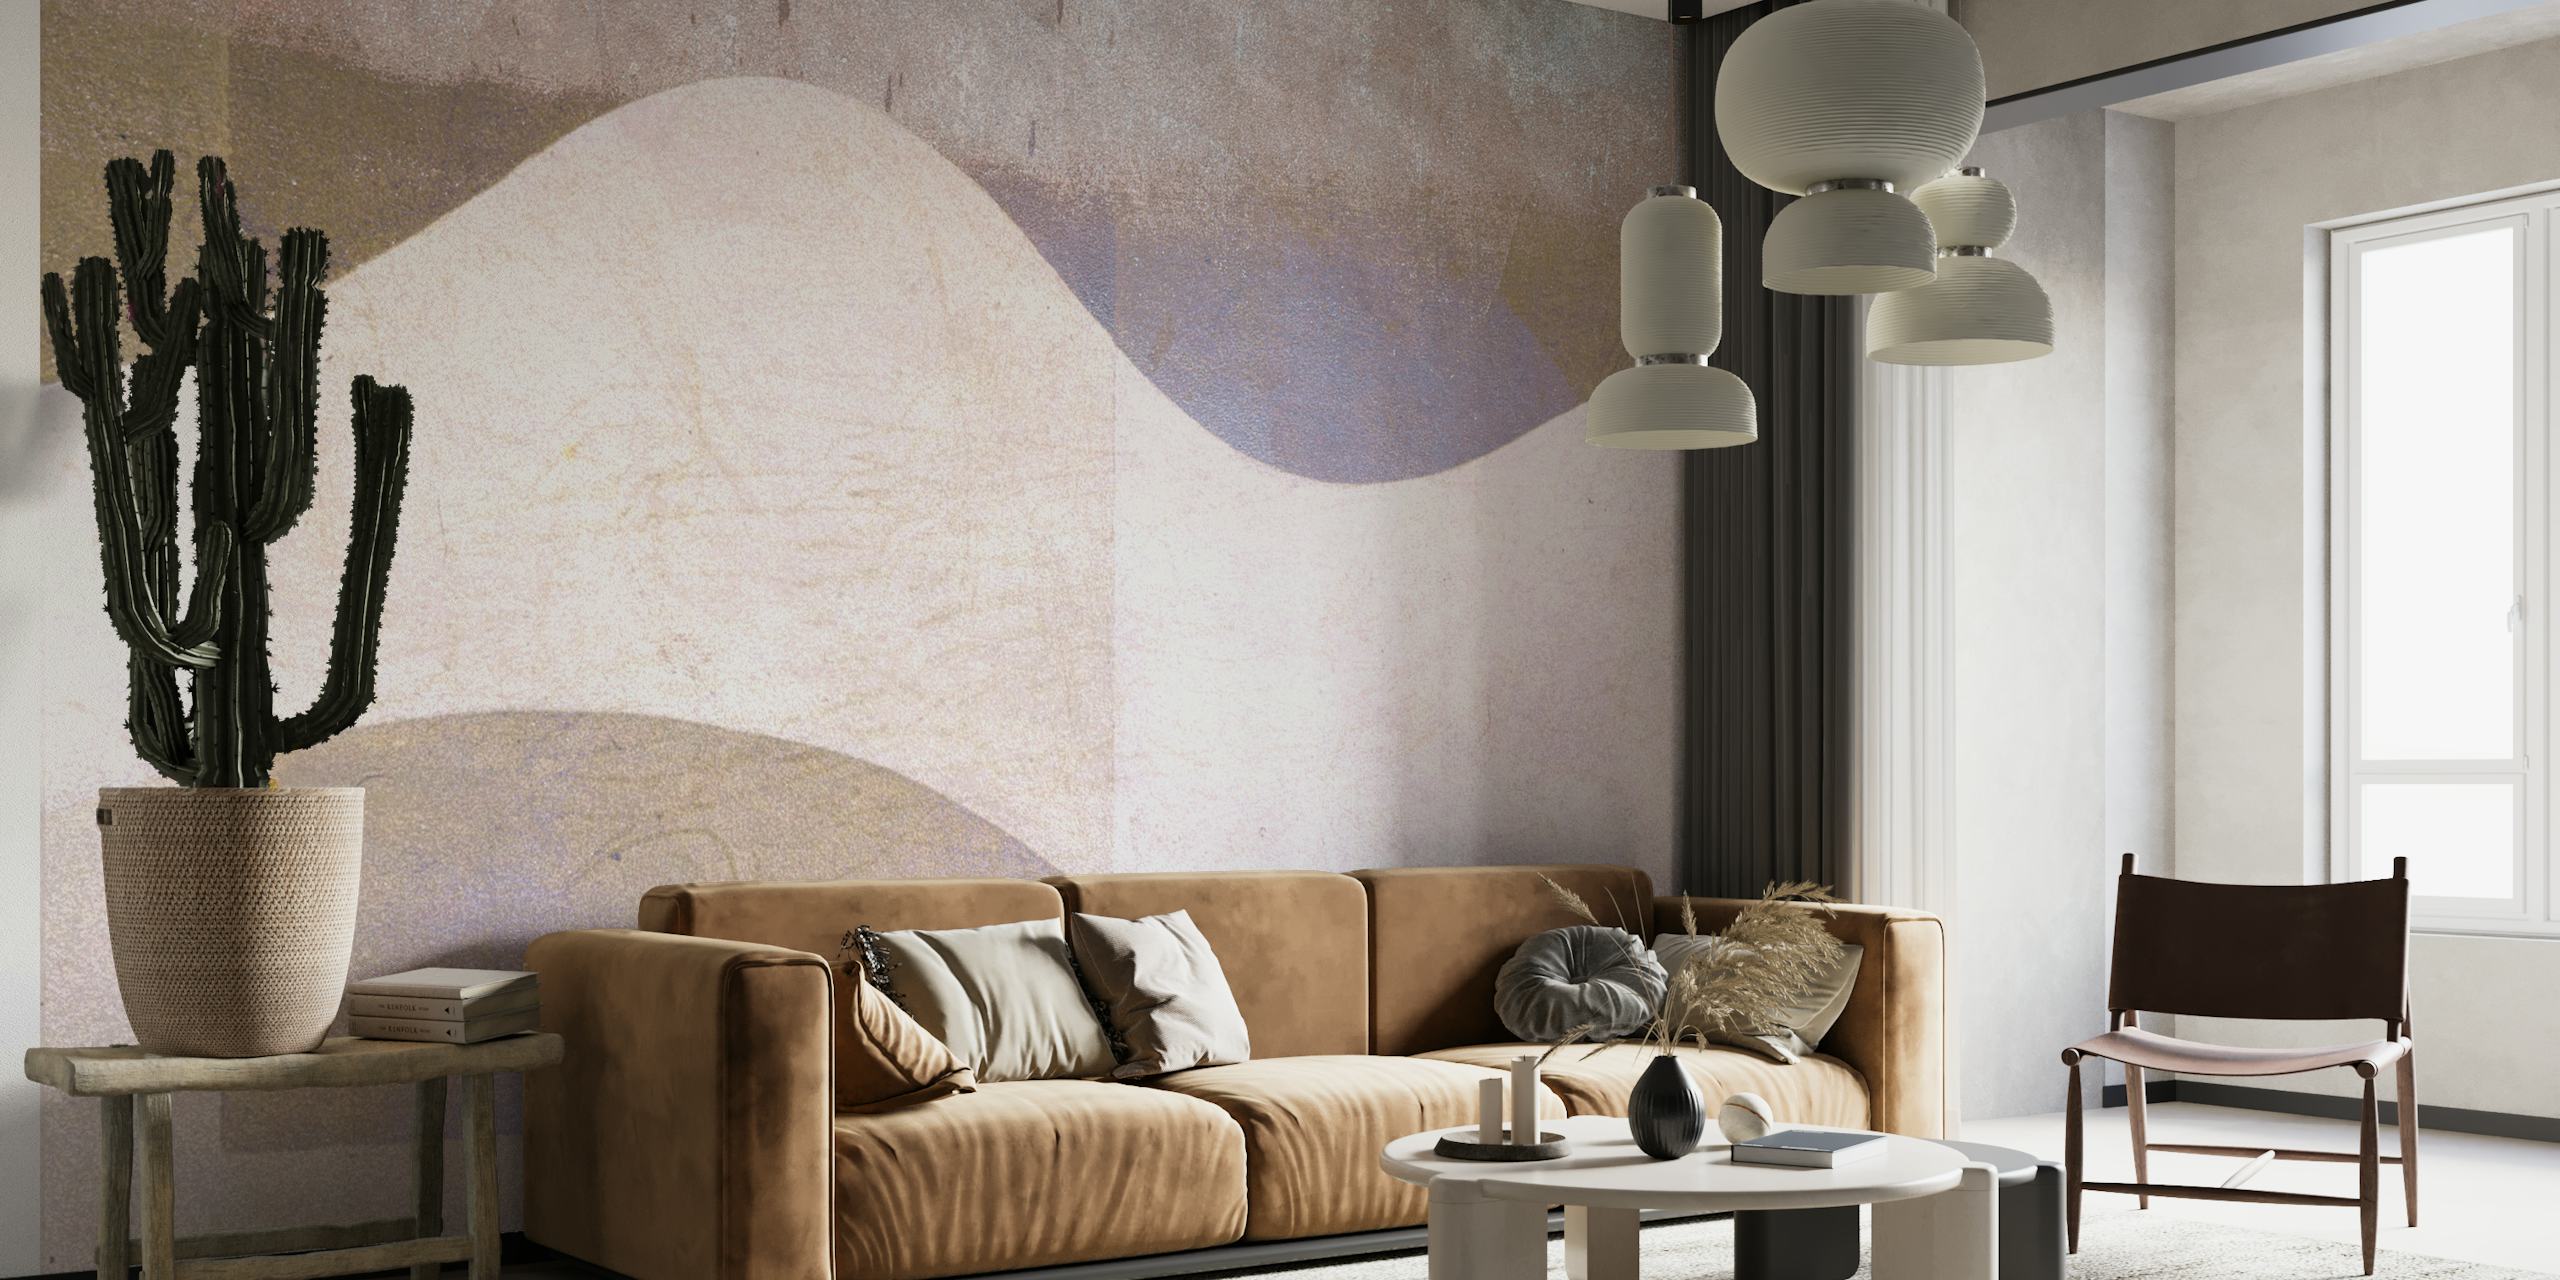 Abstract wall mural with soft curves and muted winter tones